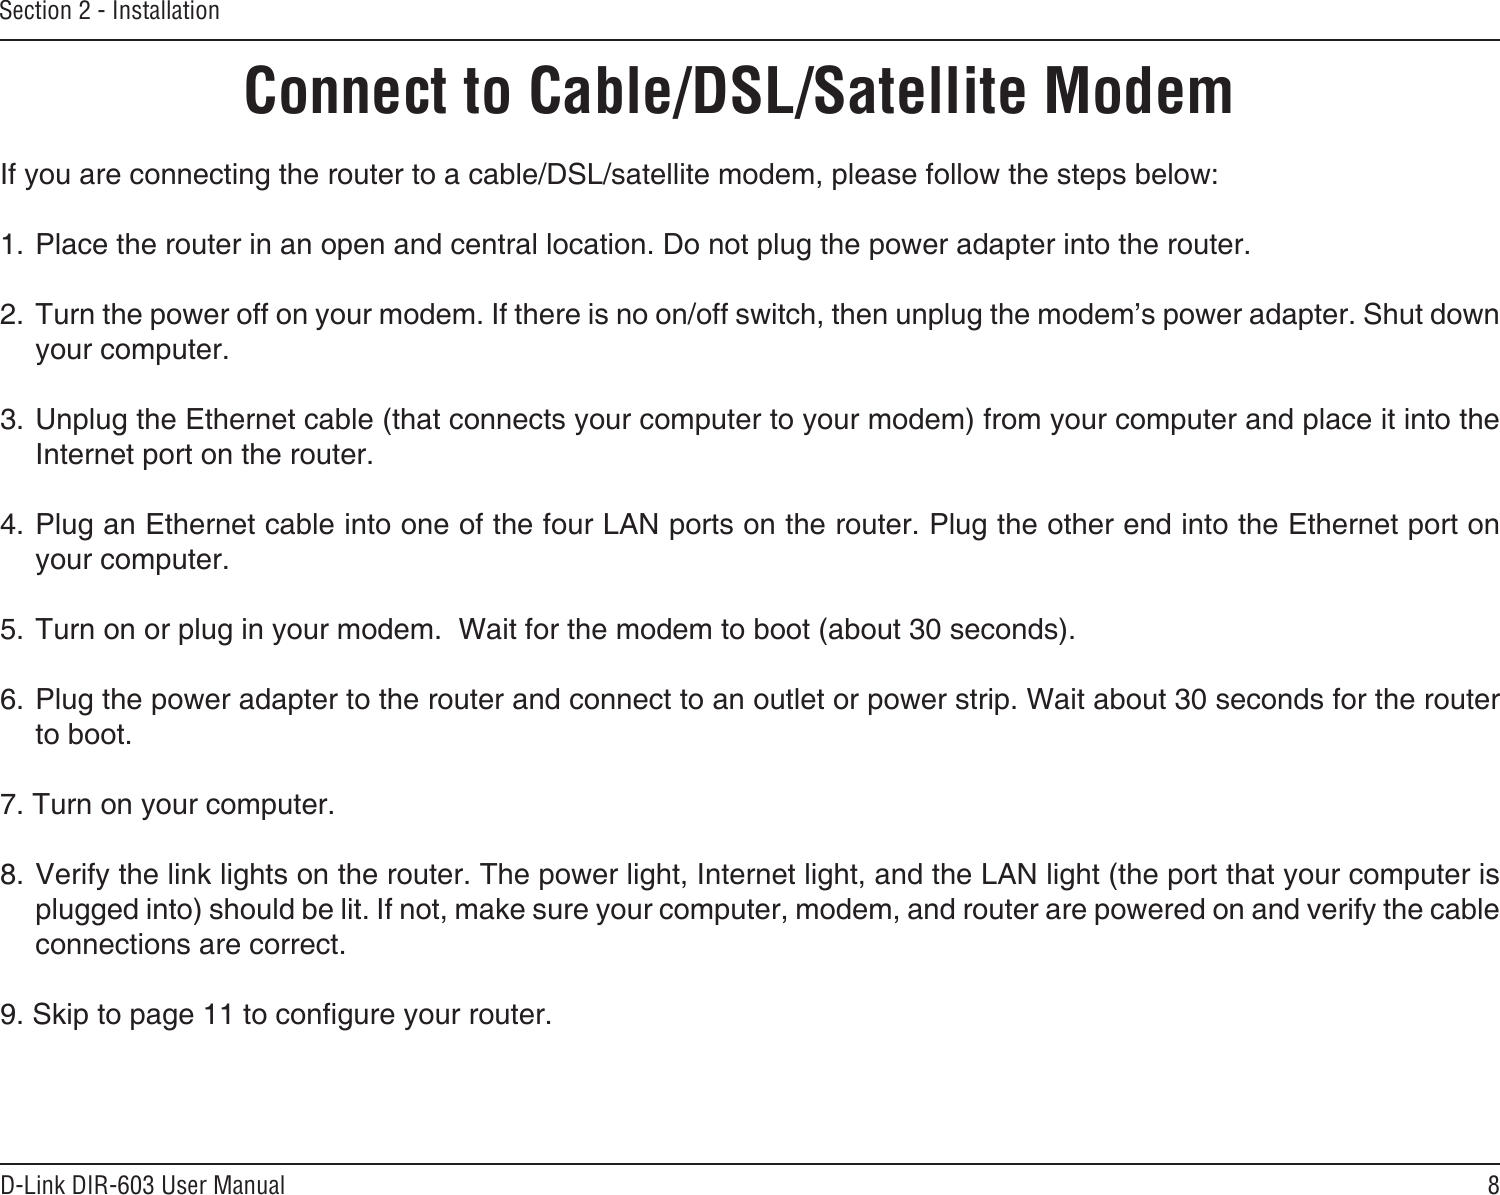 8D-Link DIR-603 User ManualSection 2 - InstallationIf you are connecting the router to a cable/DSL/satellite modem, please follow the steps below:1. Place the router in an open and central location. Do not plug the power adapter into the router. 2. Turn the power off on your modem. If there is no on/off switch, then unplug the modem’s power adapter. Shut down your computer.3. Unplug the Ethernet cable (that connects your computer to your modem) from your computer and place it into the Internet port on the router.  4. Plug an Ethernet cable into one of the four LAN ports on the router. Plug the other end into the Ethernet port on your computer.5. Turn on or plug in your modem.  Wait for the modem to boot (about 30 seconds). 6. Plug the power adapter to the router and connect to an outlet or power strip. Wait about 30 seconds for the router to boot. 7. Turn on your computer. 8. Verify the link lights on the router. The power light, Internet light, and the LAN light (the port that your computer is plugged into) should be lit. If not, make sure your computer, modem, and router are powered on and verify the cable connections are correct. 9. Skip to page 11 to congure your router. Connect to Cable/DSL/Satellite Modem